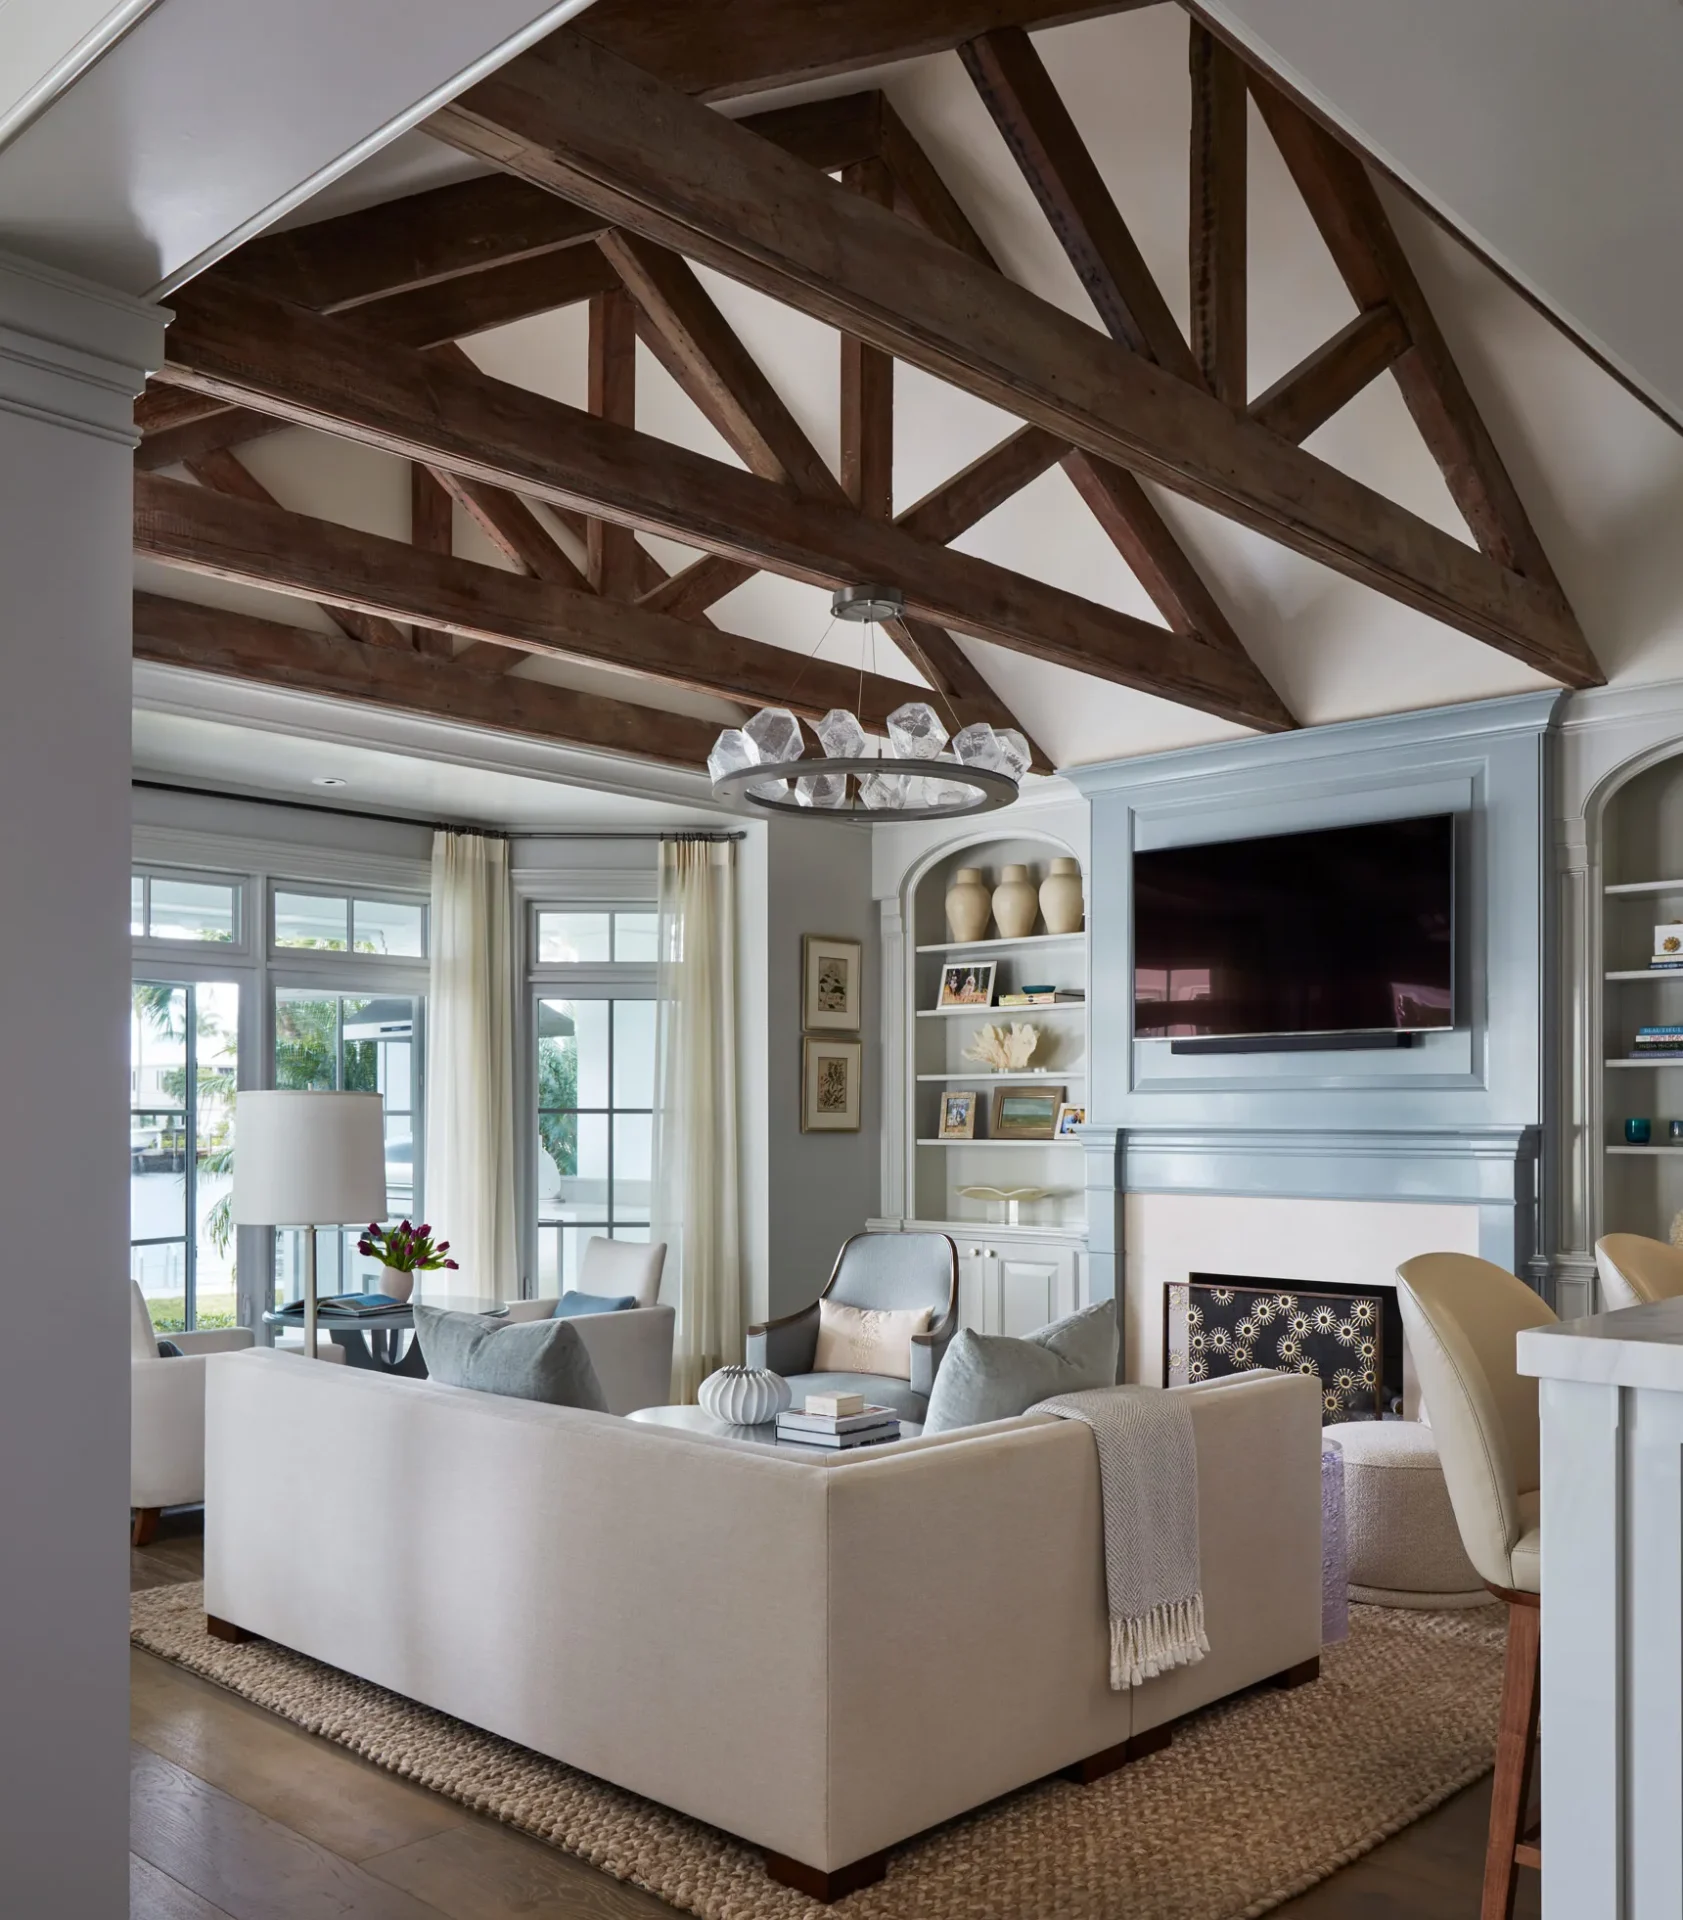 A living room with white furniture and wooden beams.